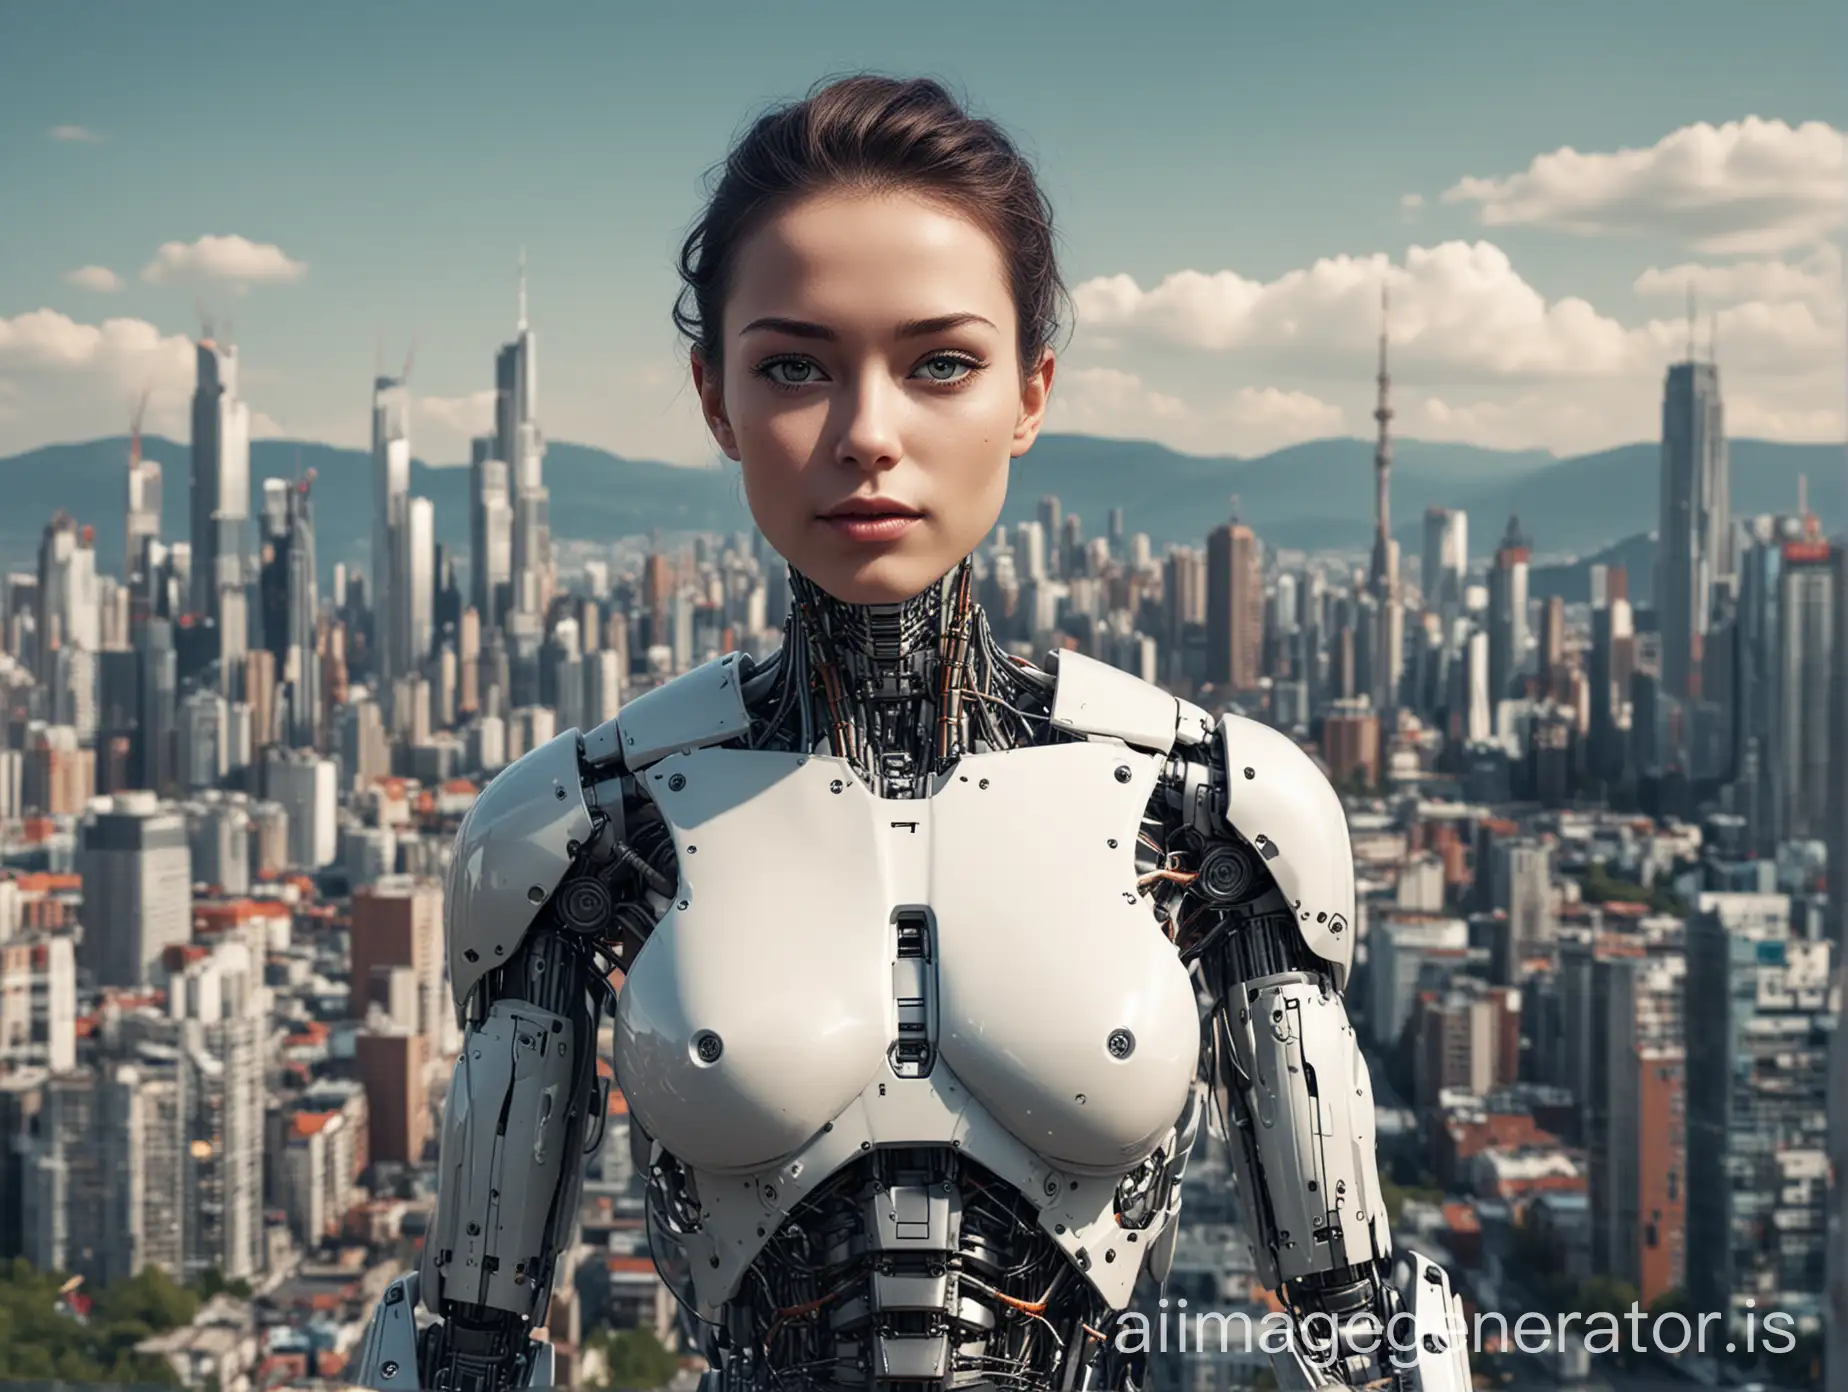 Half human, half robot, posing for the camera. Modern city in the background.